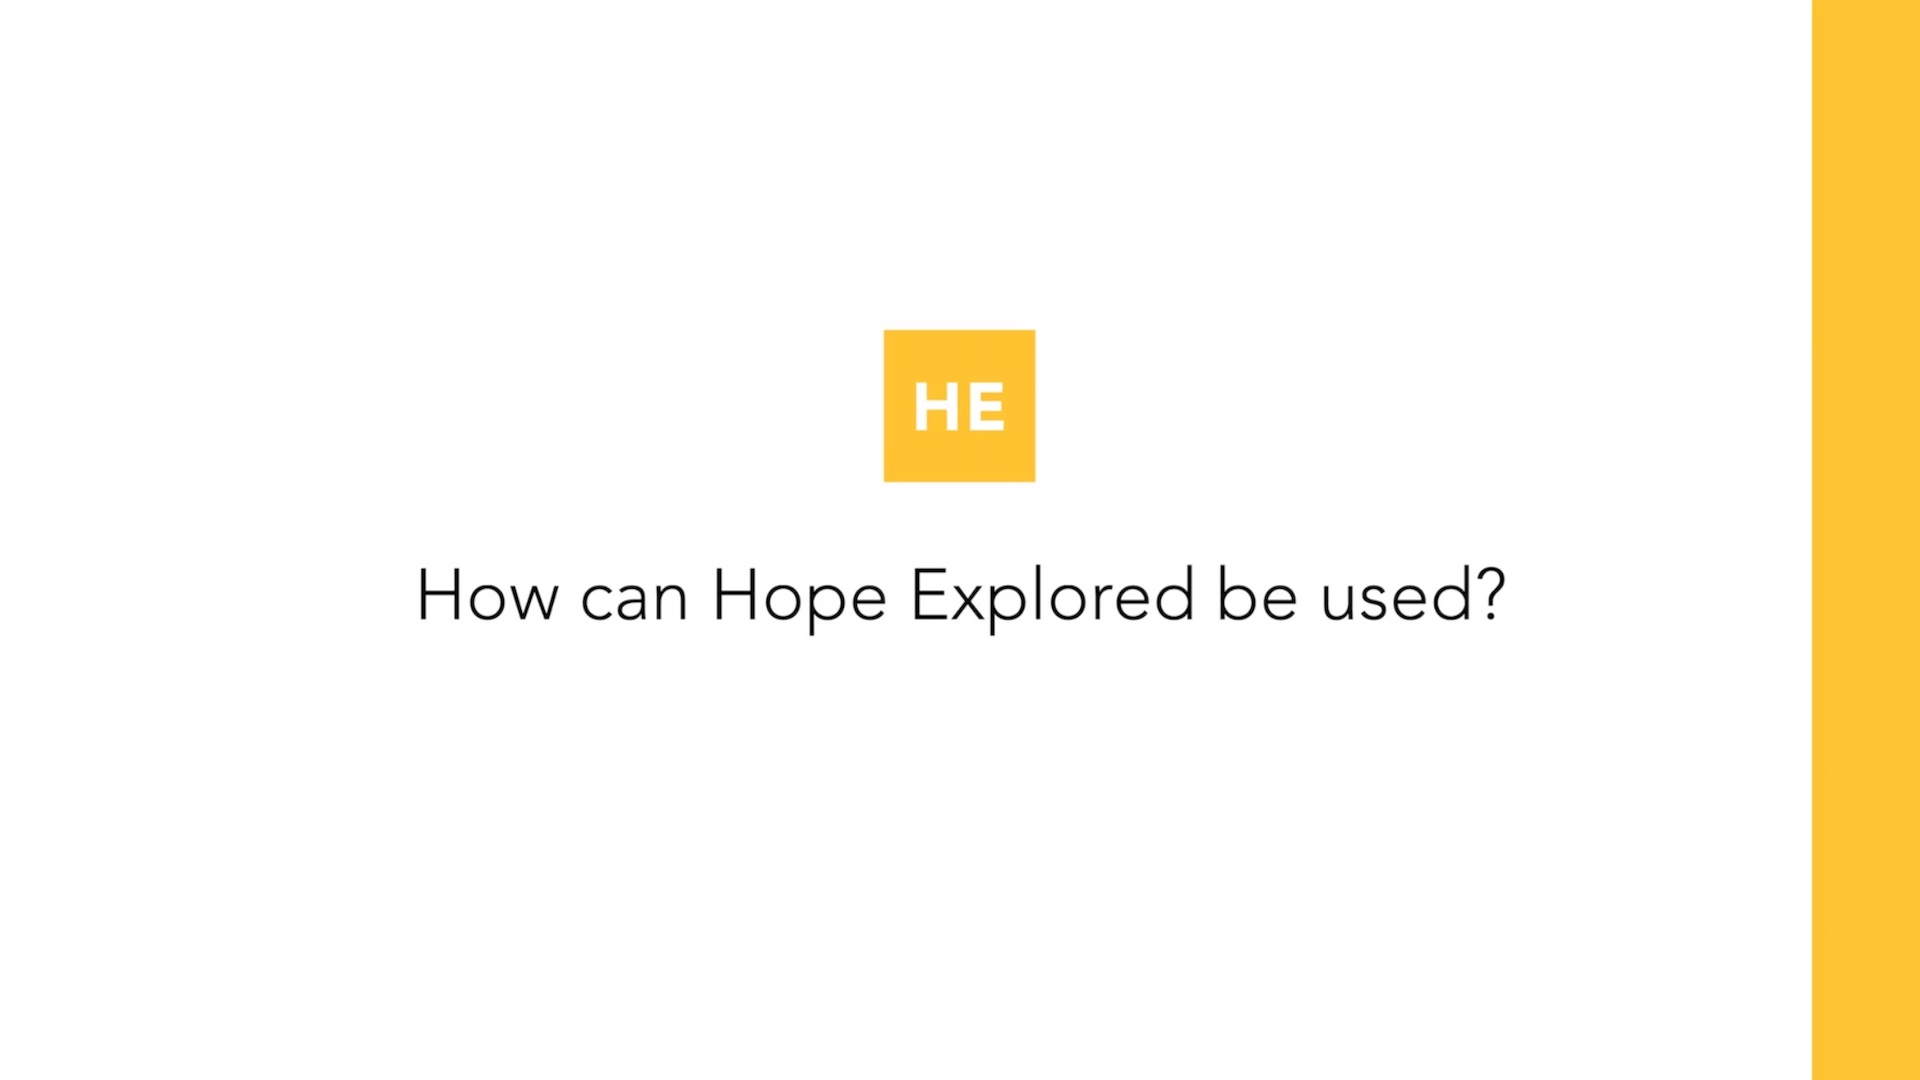 How can Hope Explored be used?